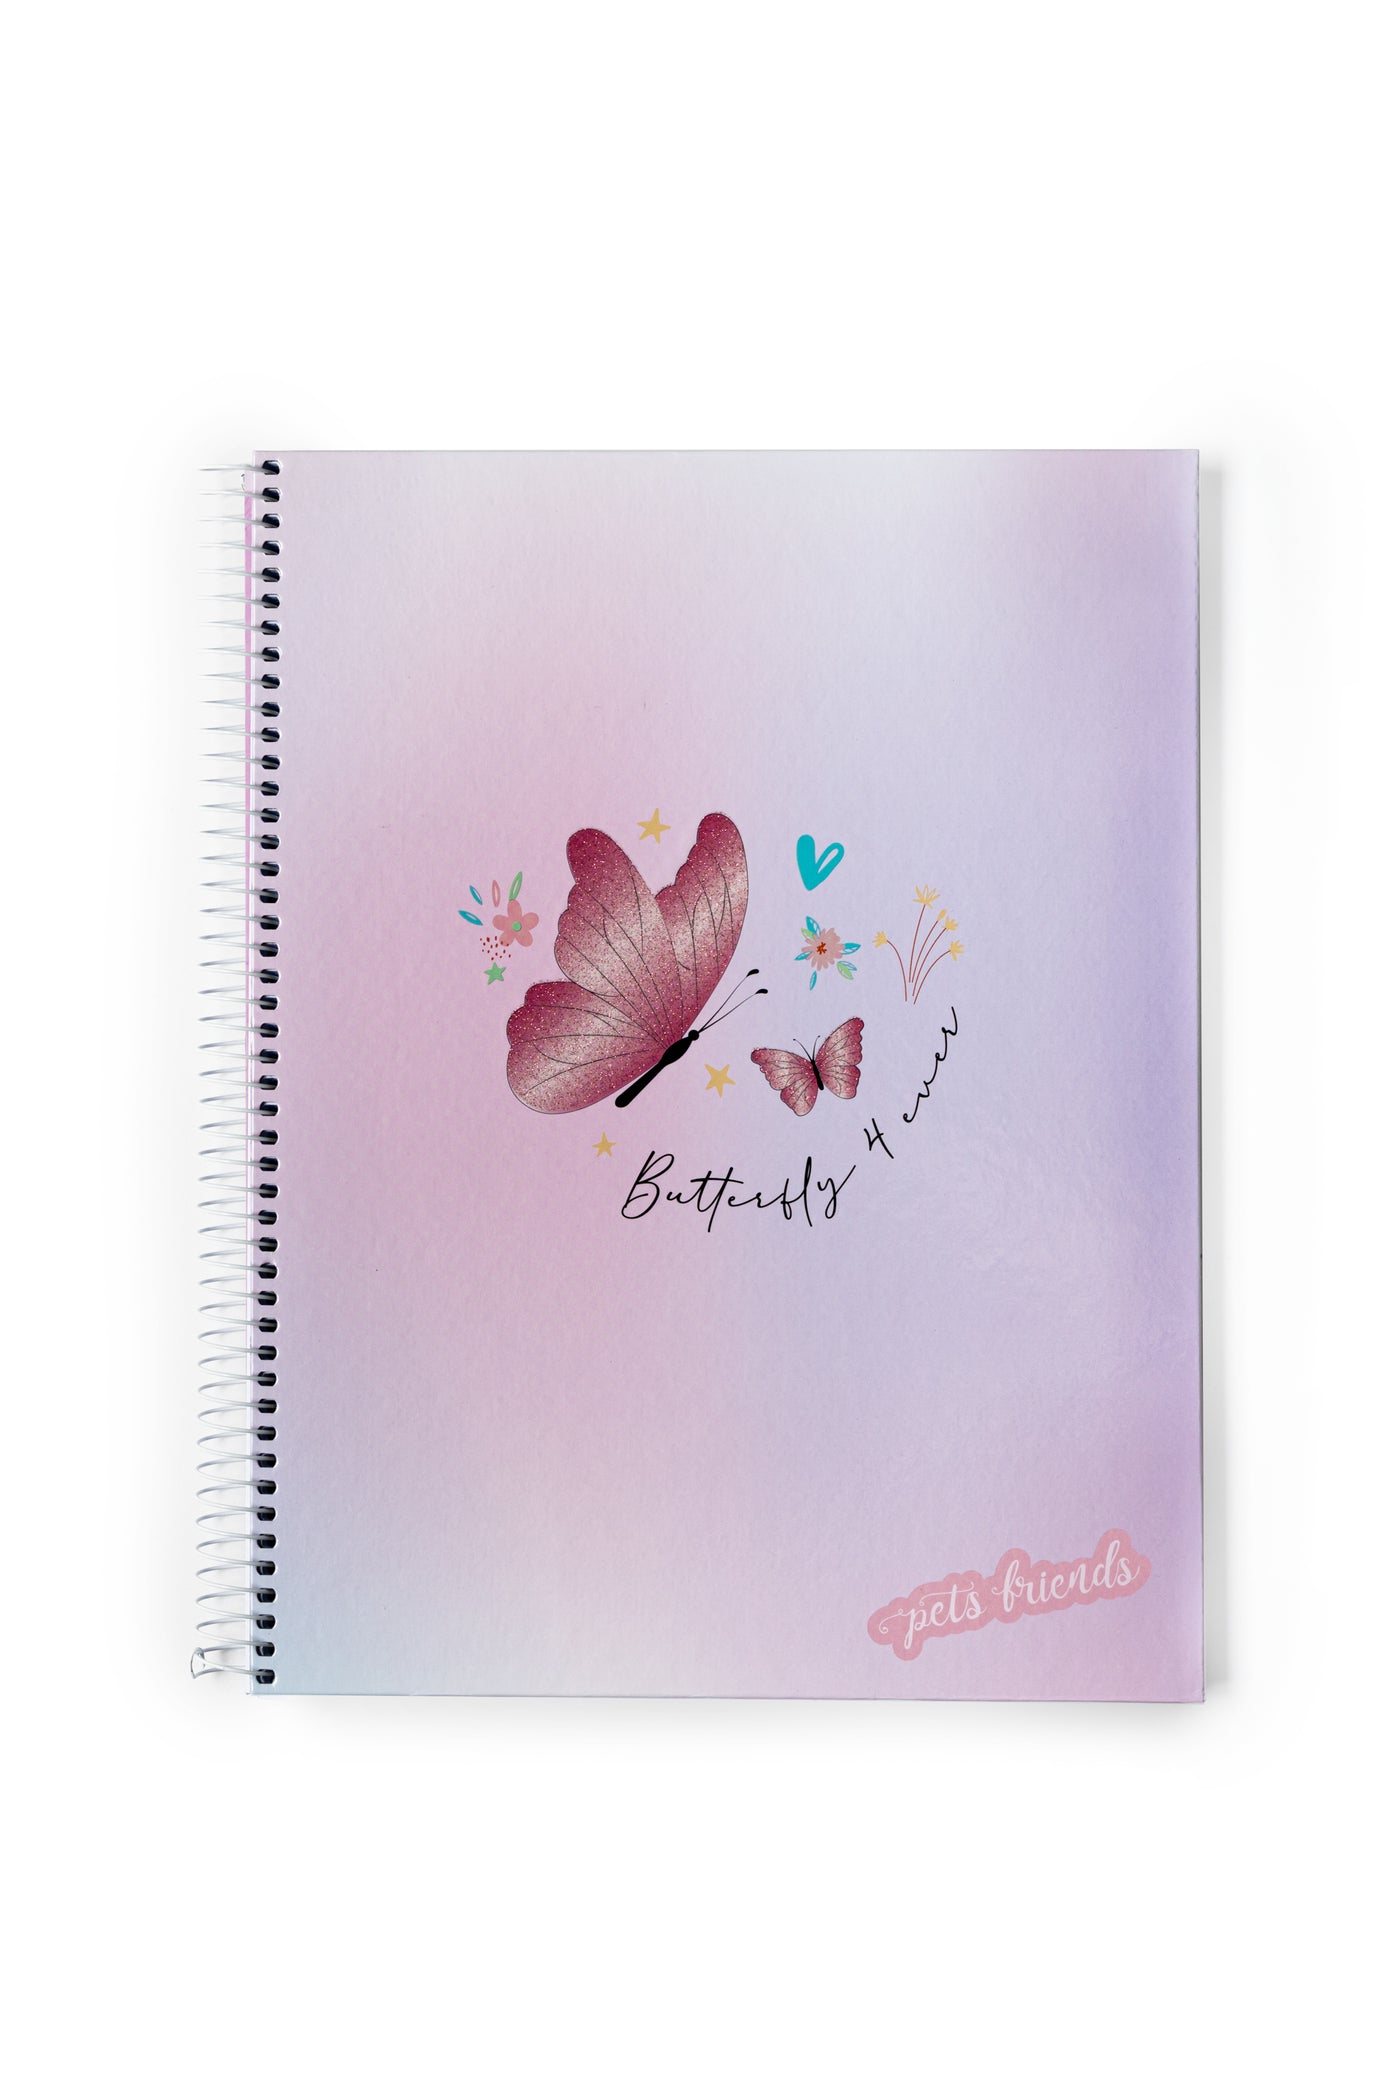 A4 Hardcover Spiral Book Pets Friends Butterfly Lined 